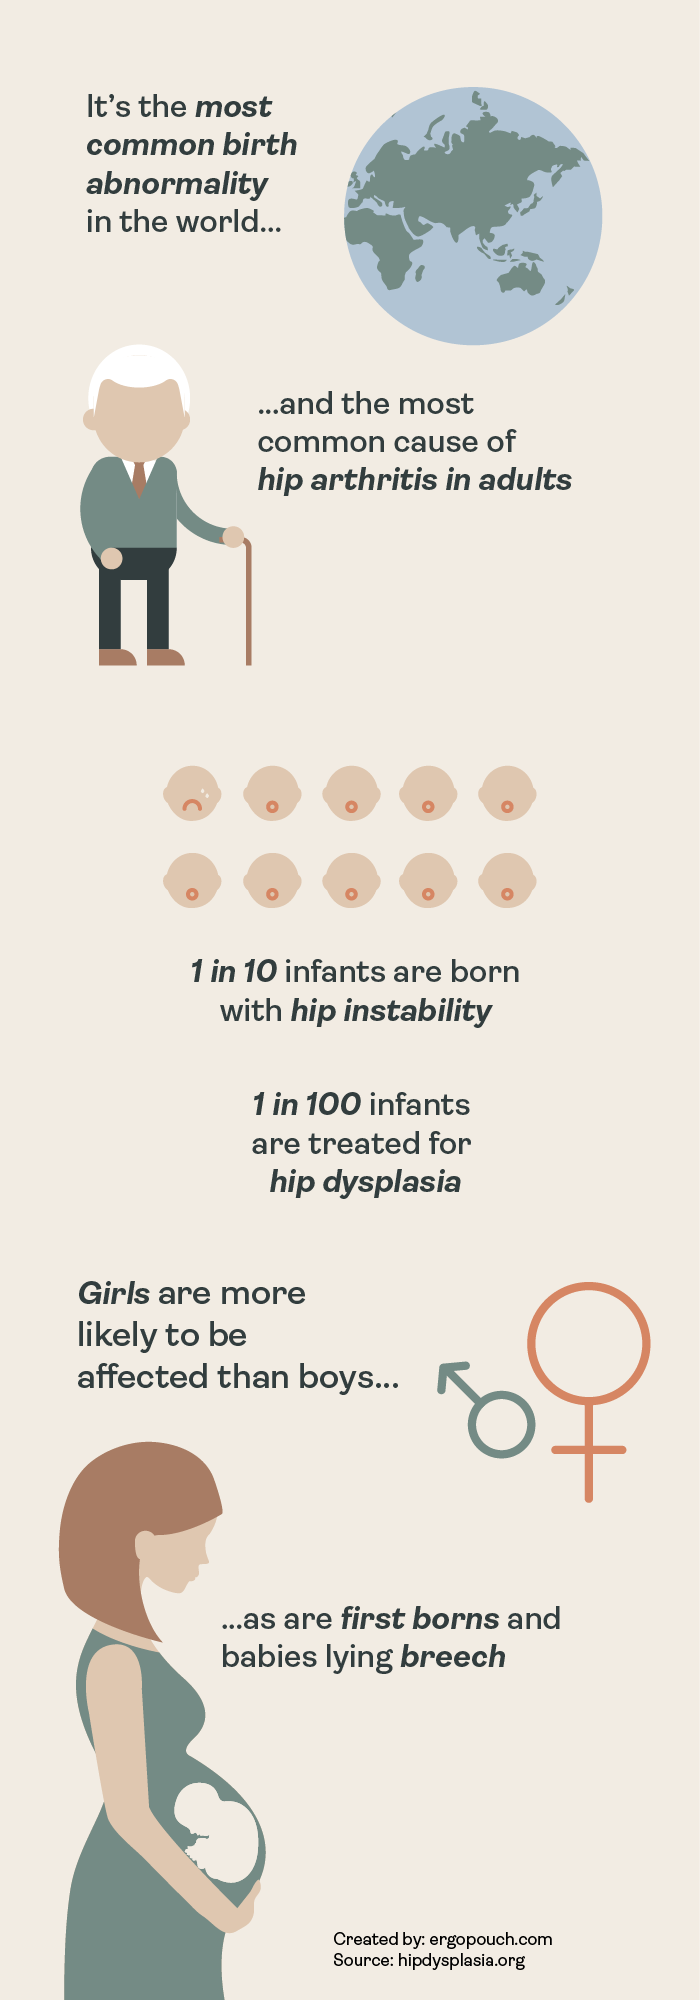 Infographic about Developmental Dysplasia of the hip (DDH) or ‘hip dysplasia’